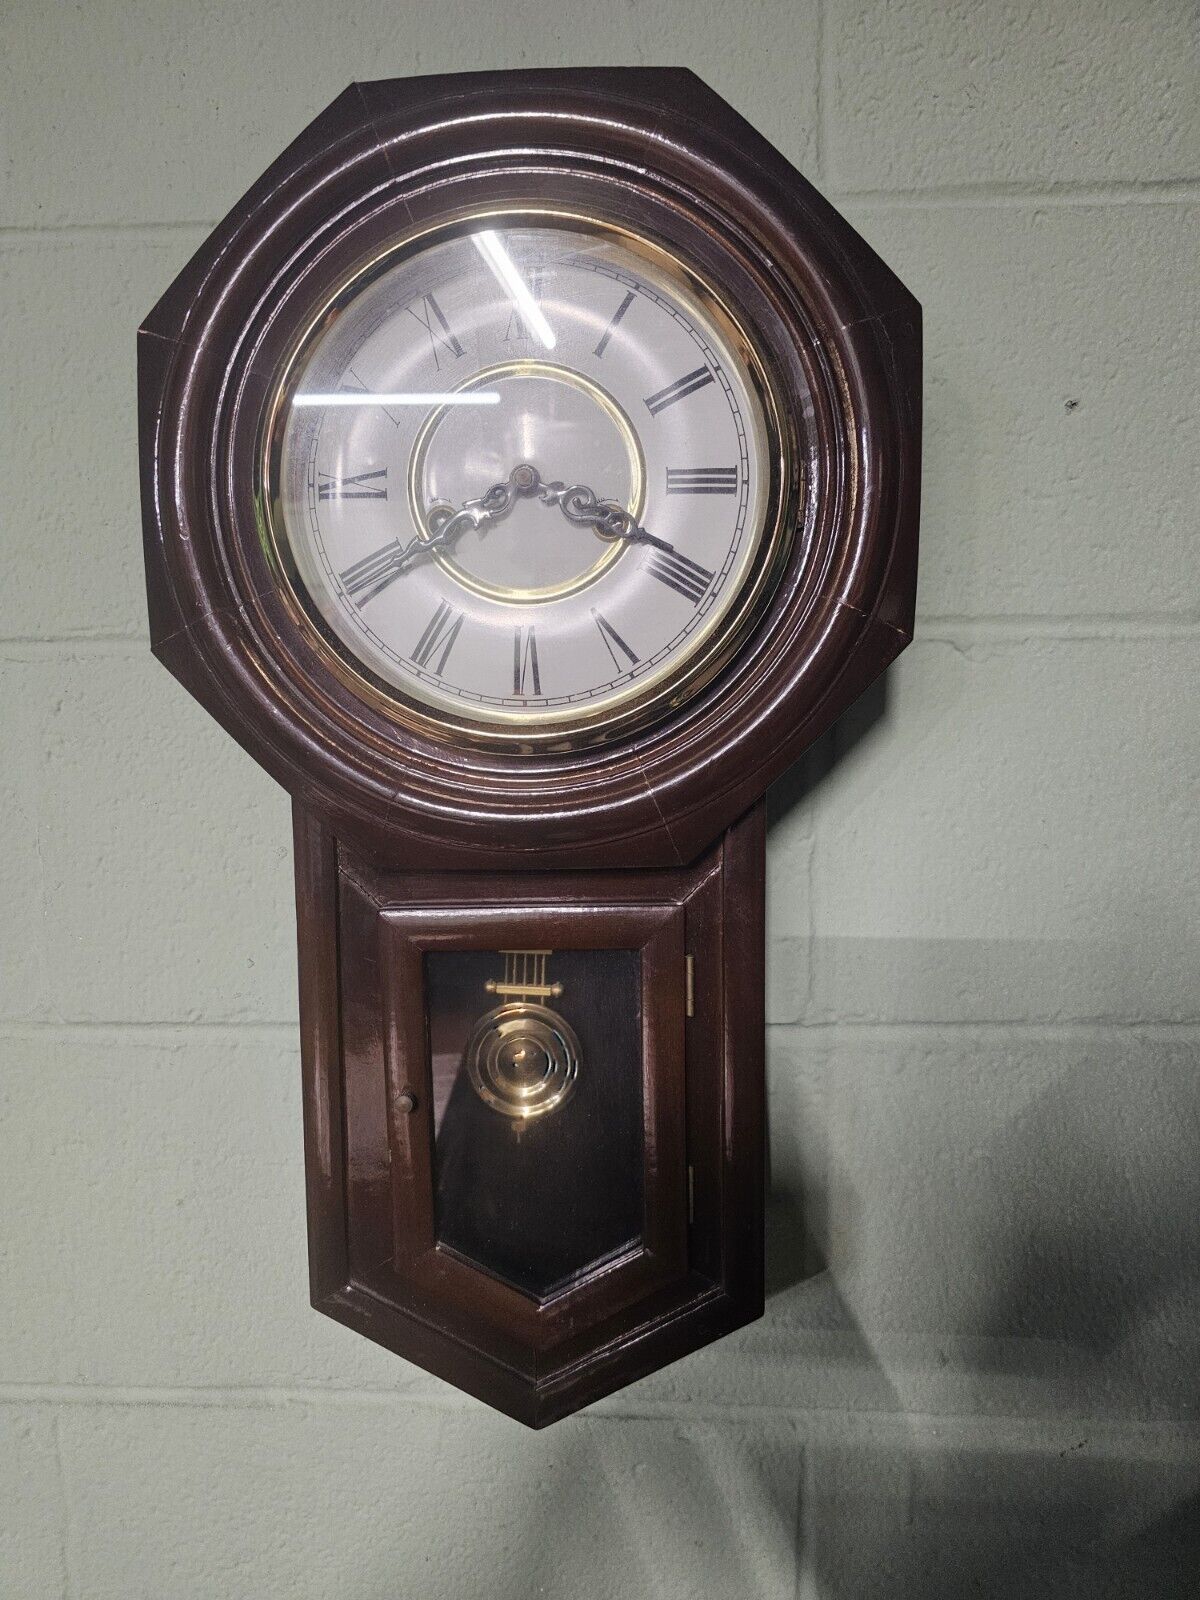 Large Vintage Chime Wall Clock In Dark Finish With Key